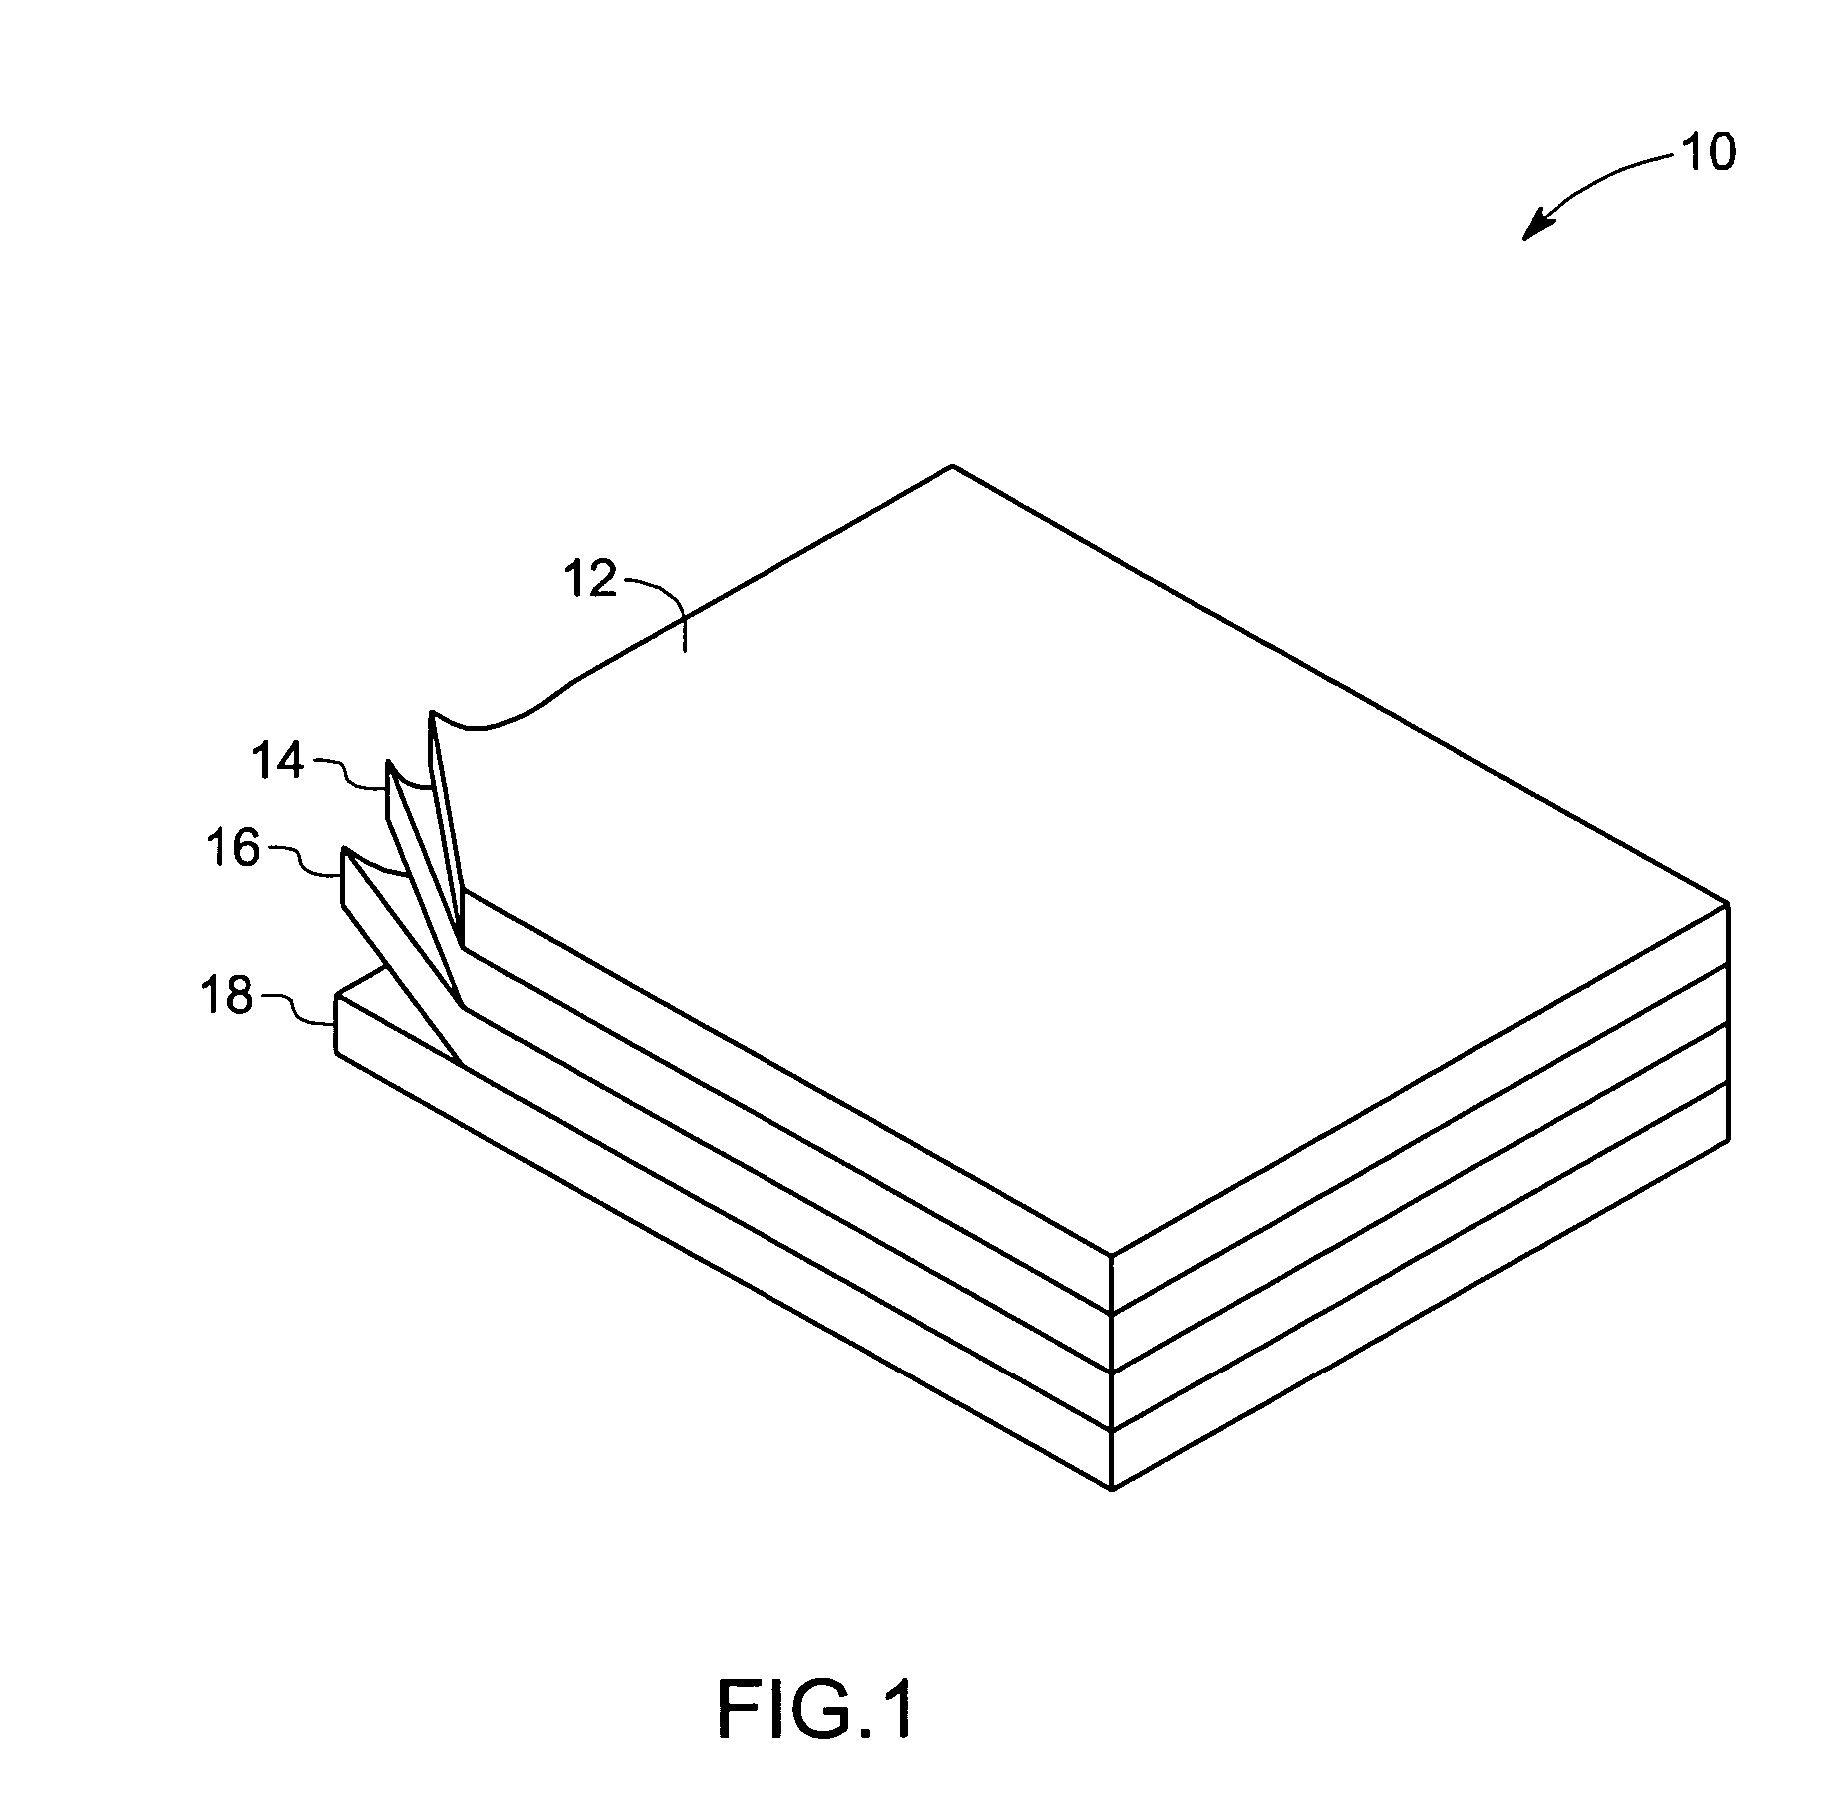 Illumination devices and methods of making the same